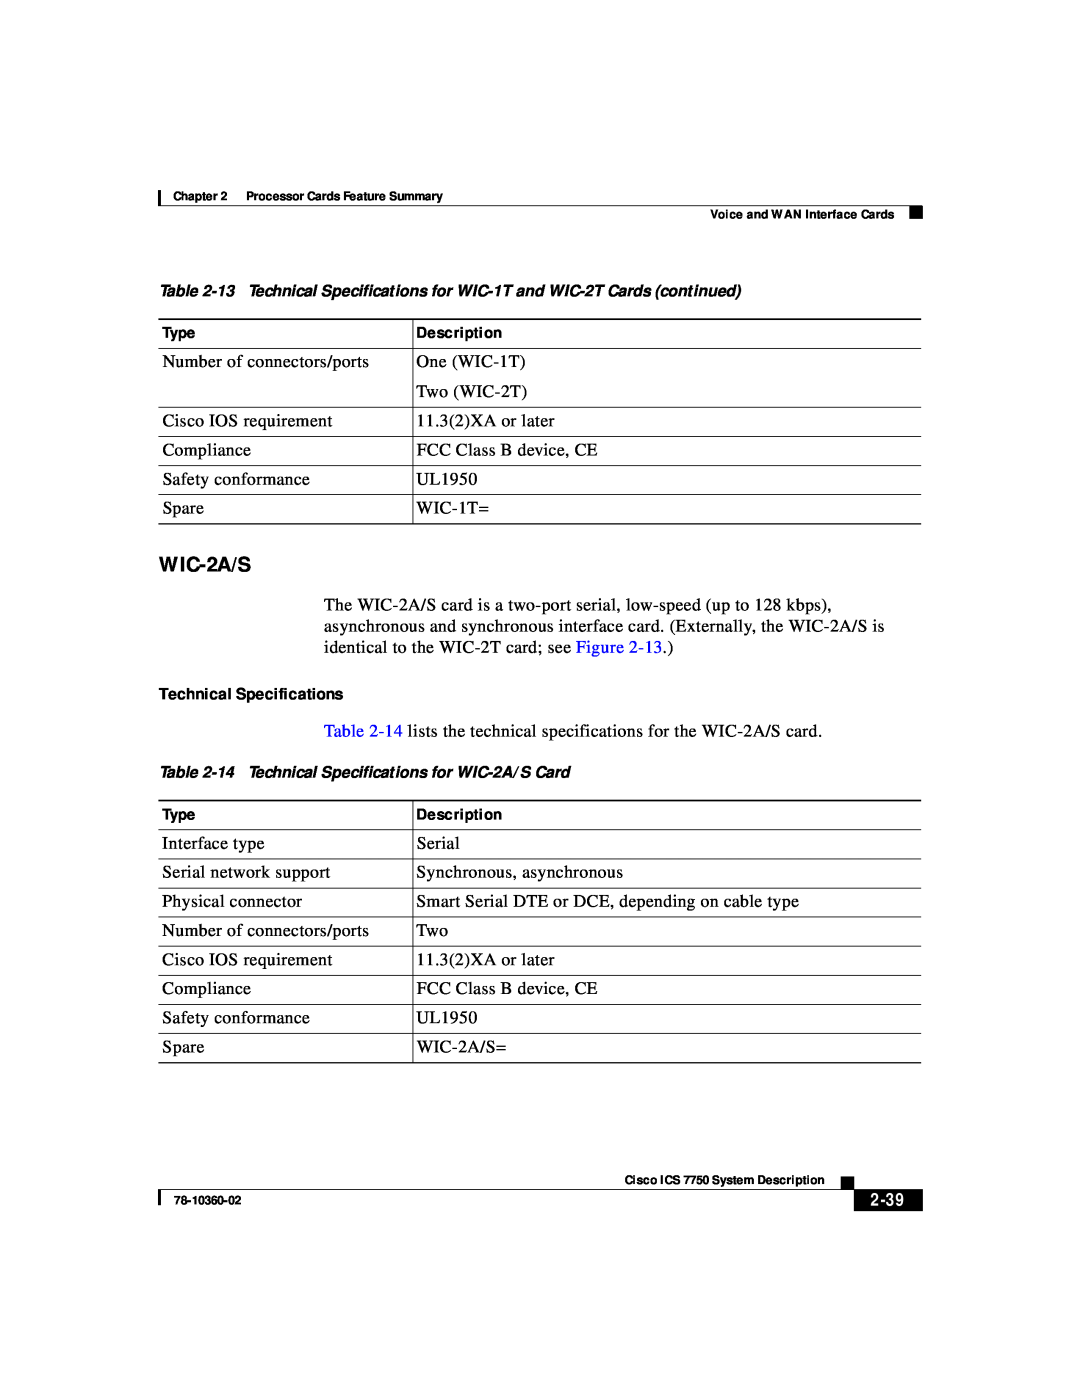 Cisco Systems ICS-7750 manual 2-39, 14 Technical Specifications for WIC-2A/S Card 